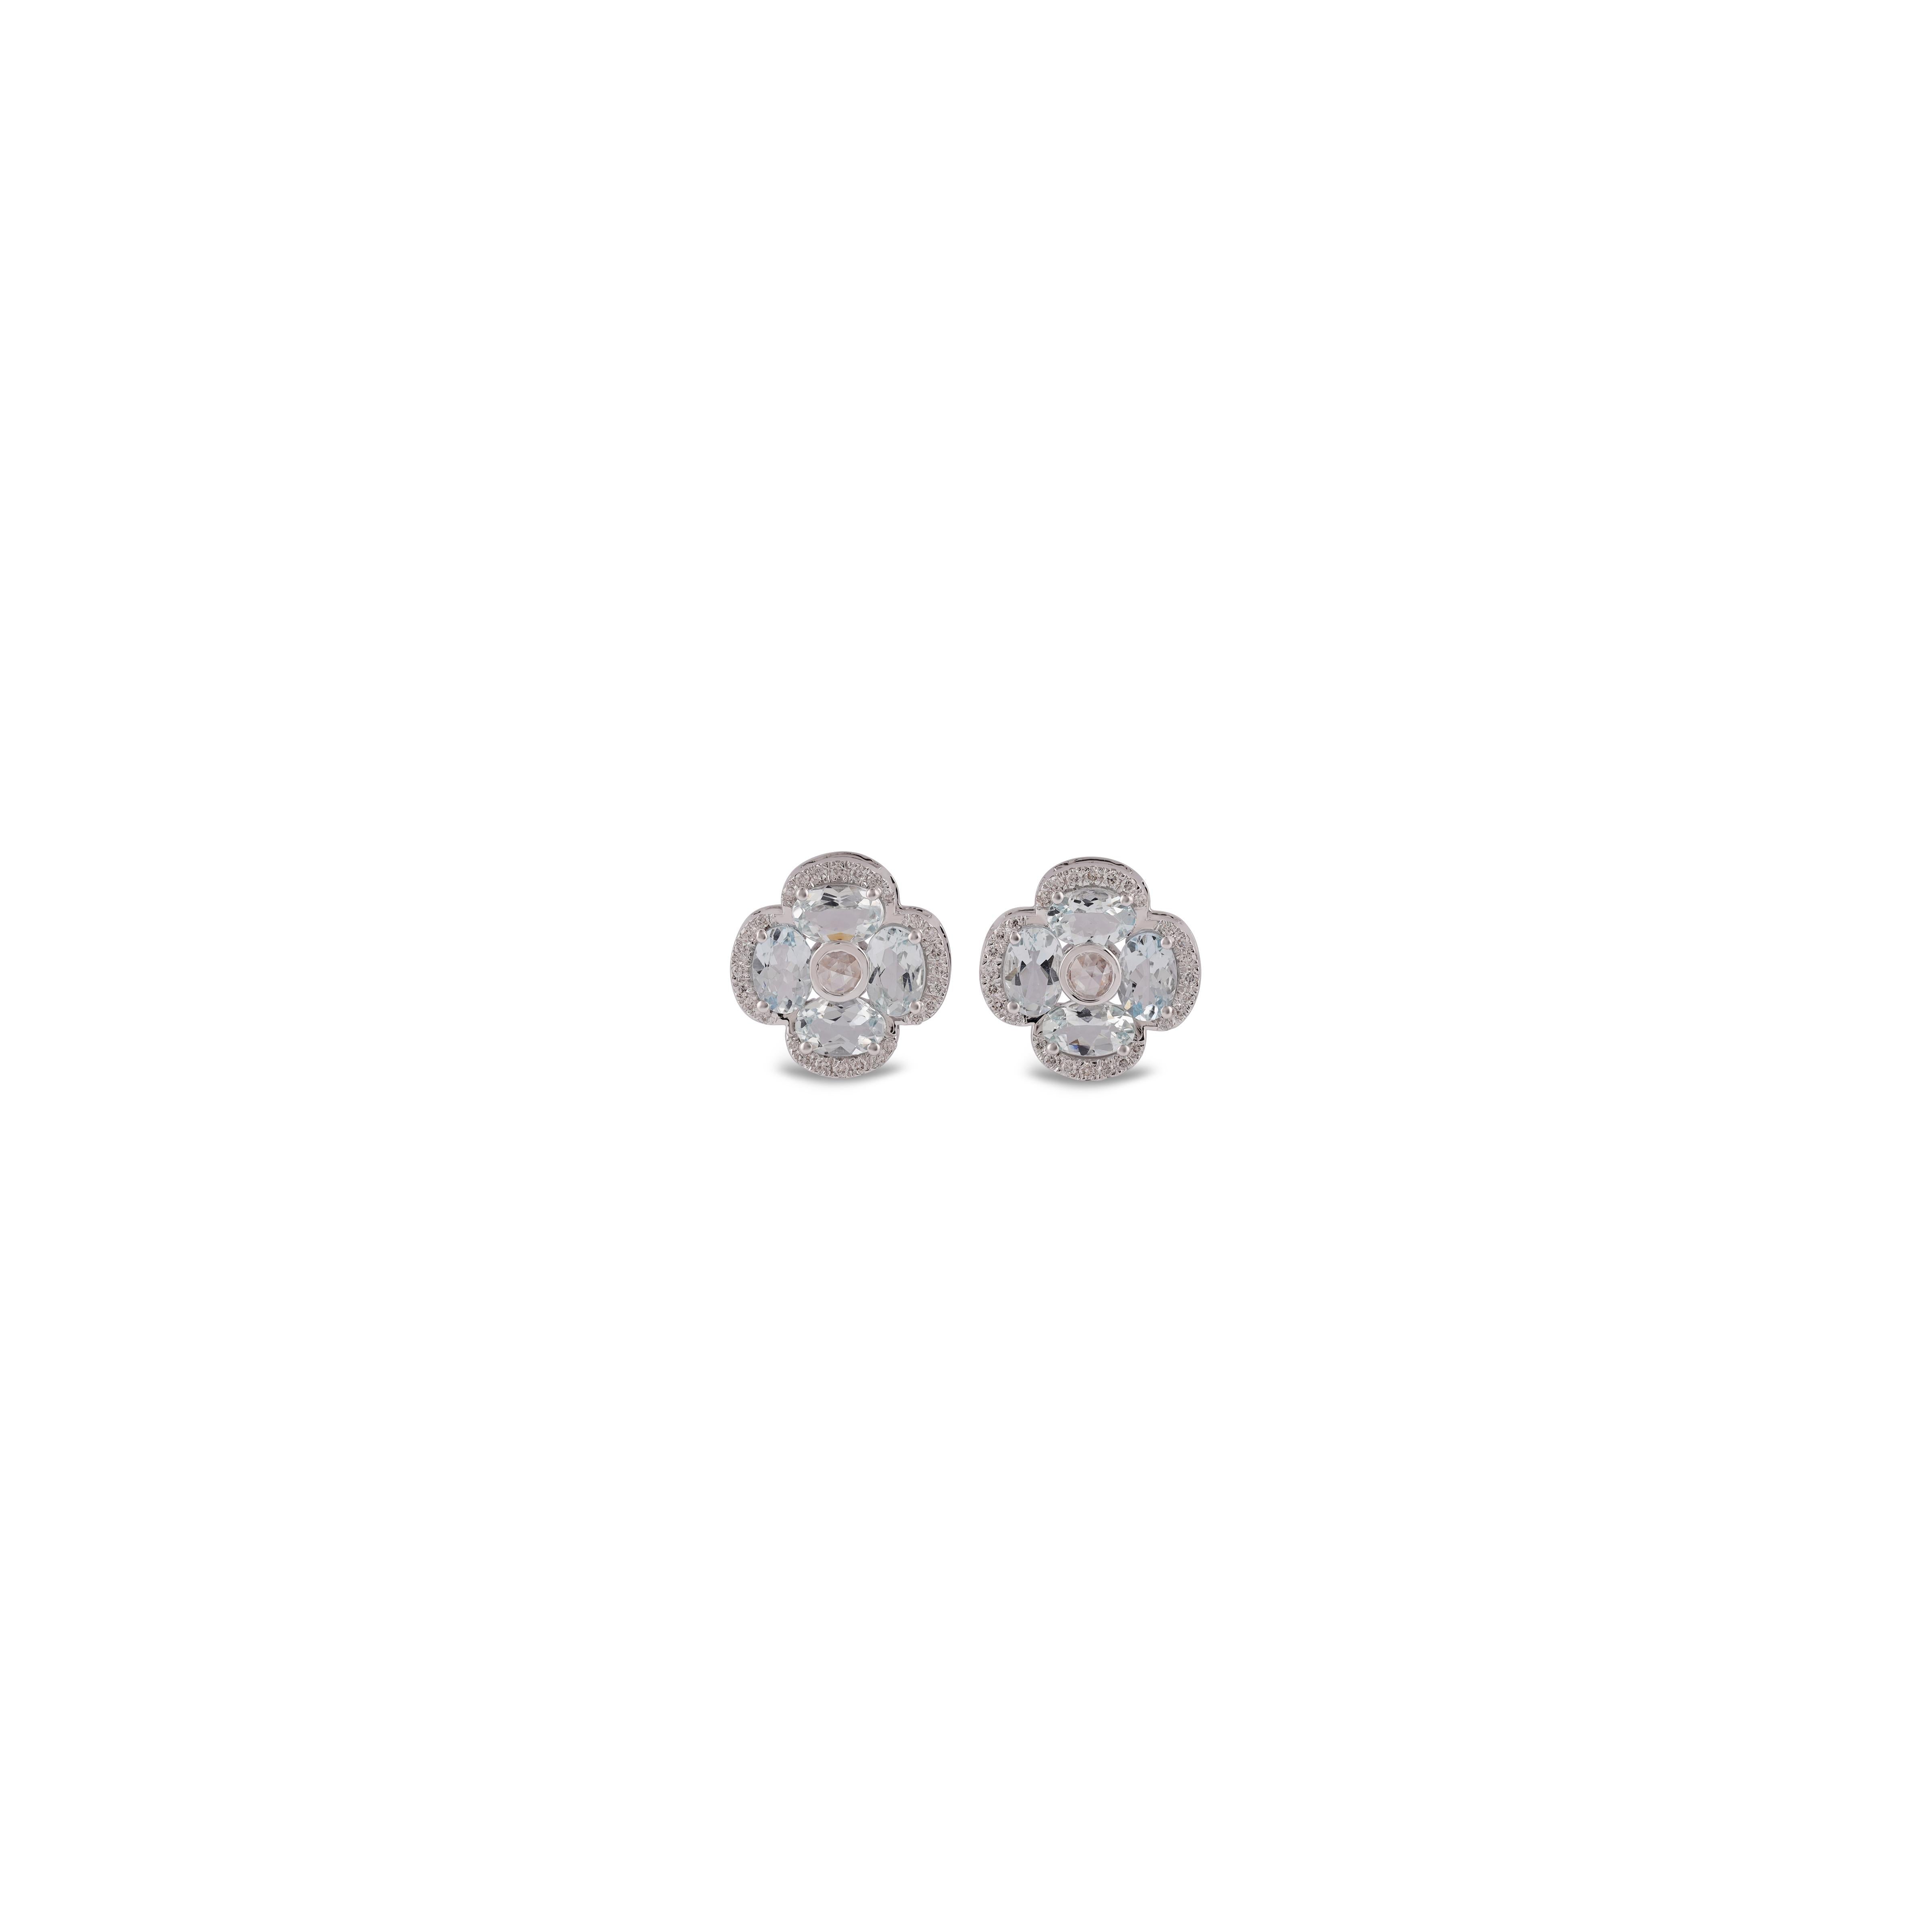 A stunning, fine and impressive pair of  2.85 carat Aquamarine and 0.29 carat Round diamond, 0.12 carat Rose cut Diamond with Solid 18k White Gold. 

Studs create a subtle beauty while showcasing the colors of the natural gemstones and illuminating